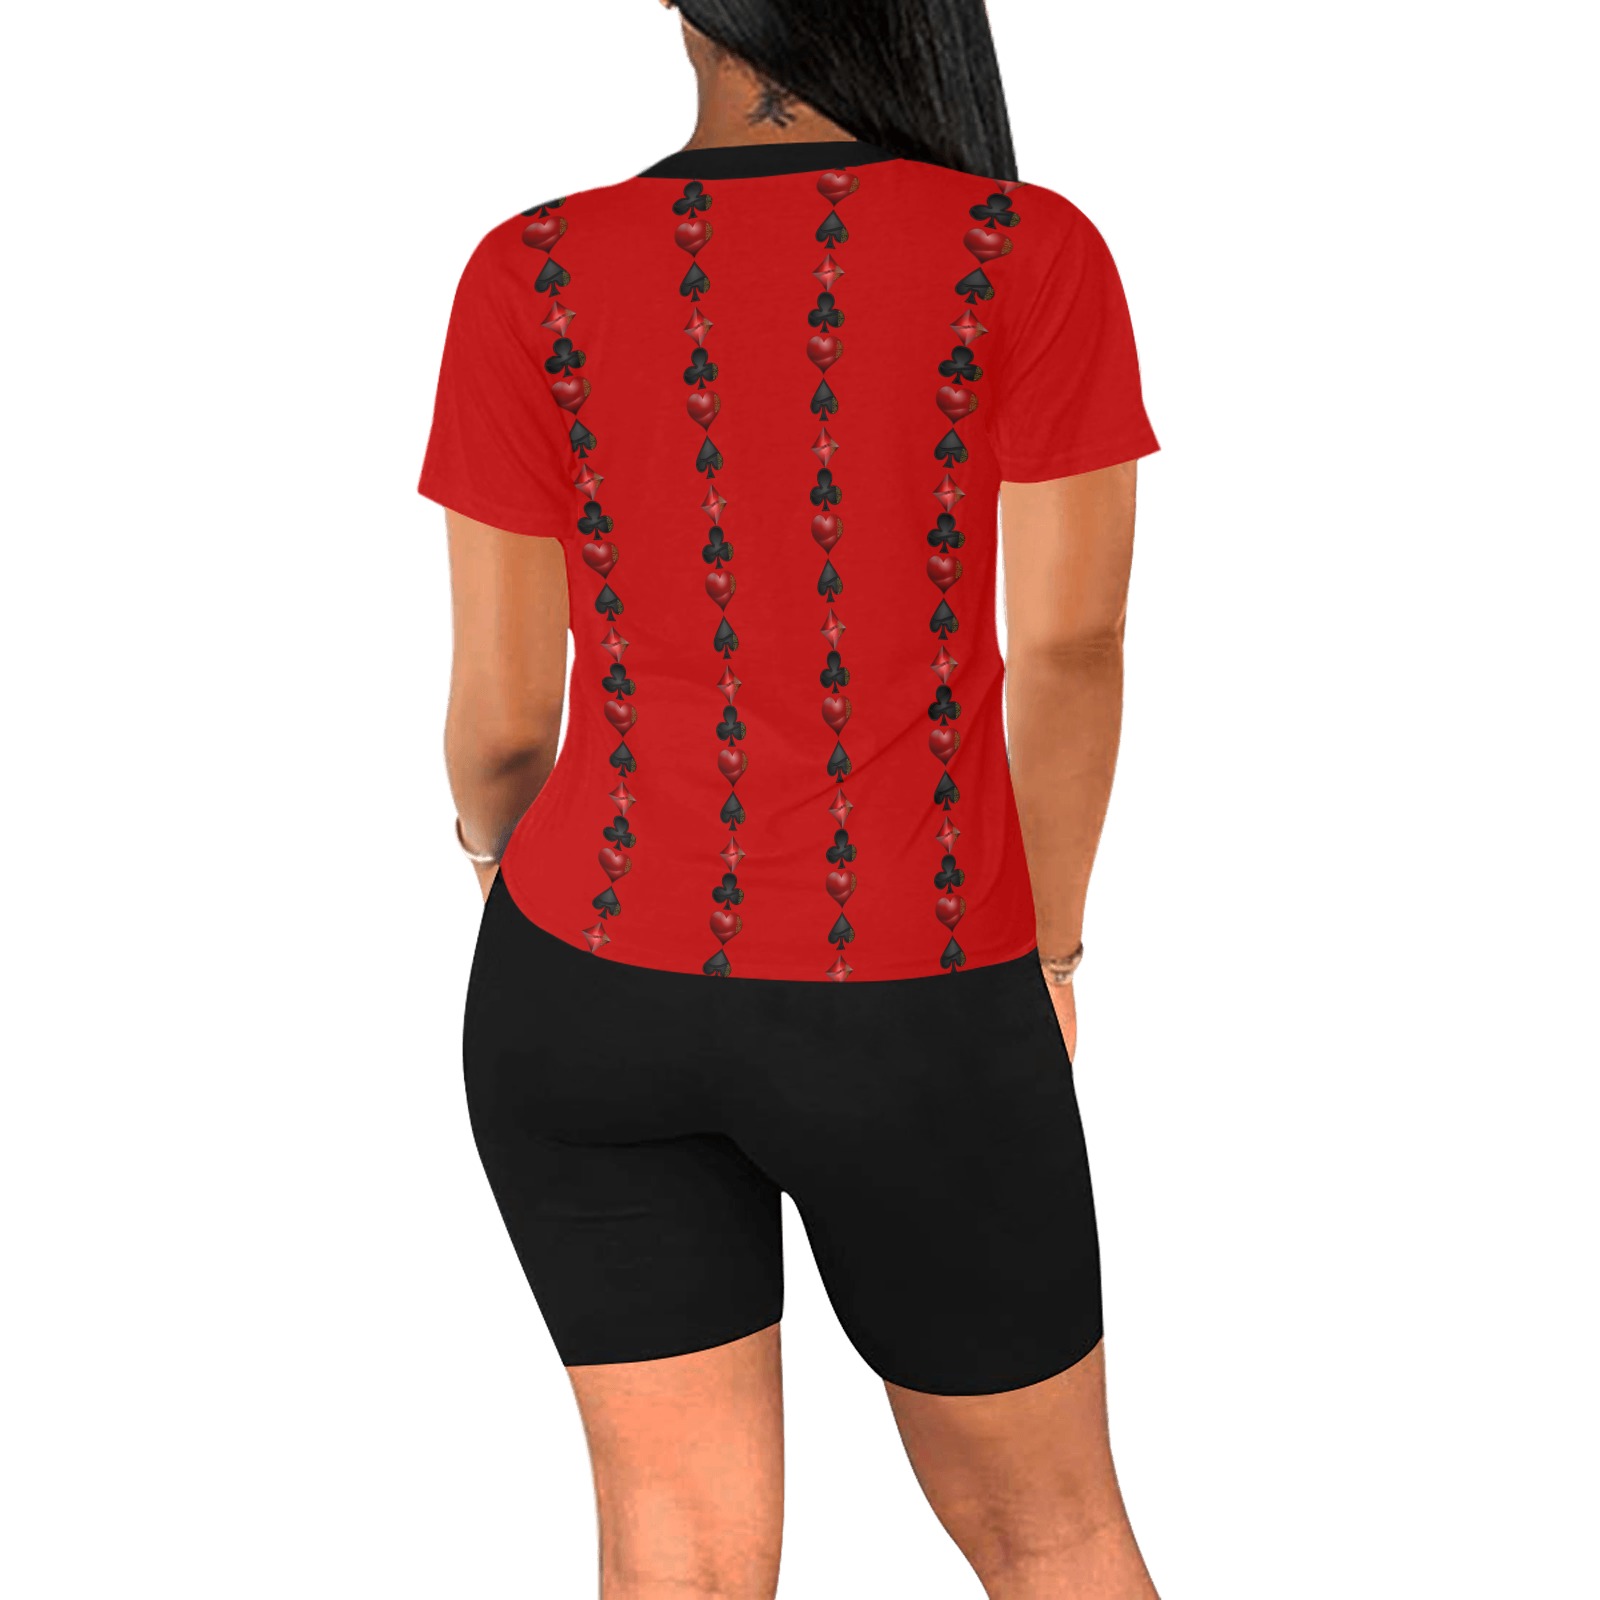 Black and Red Casino Card Shapes on Red Women's Short Yoga Set